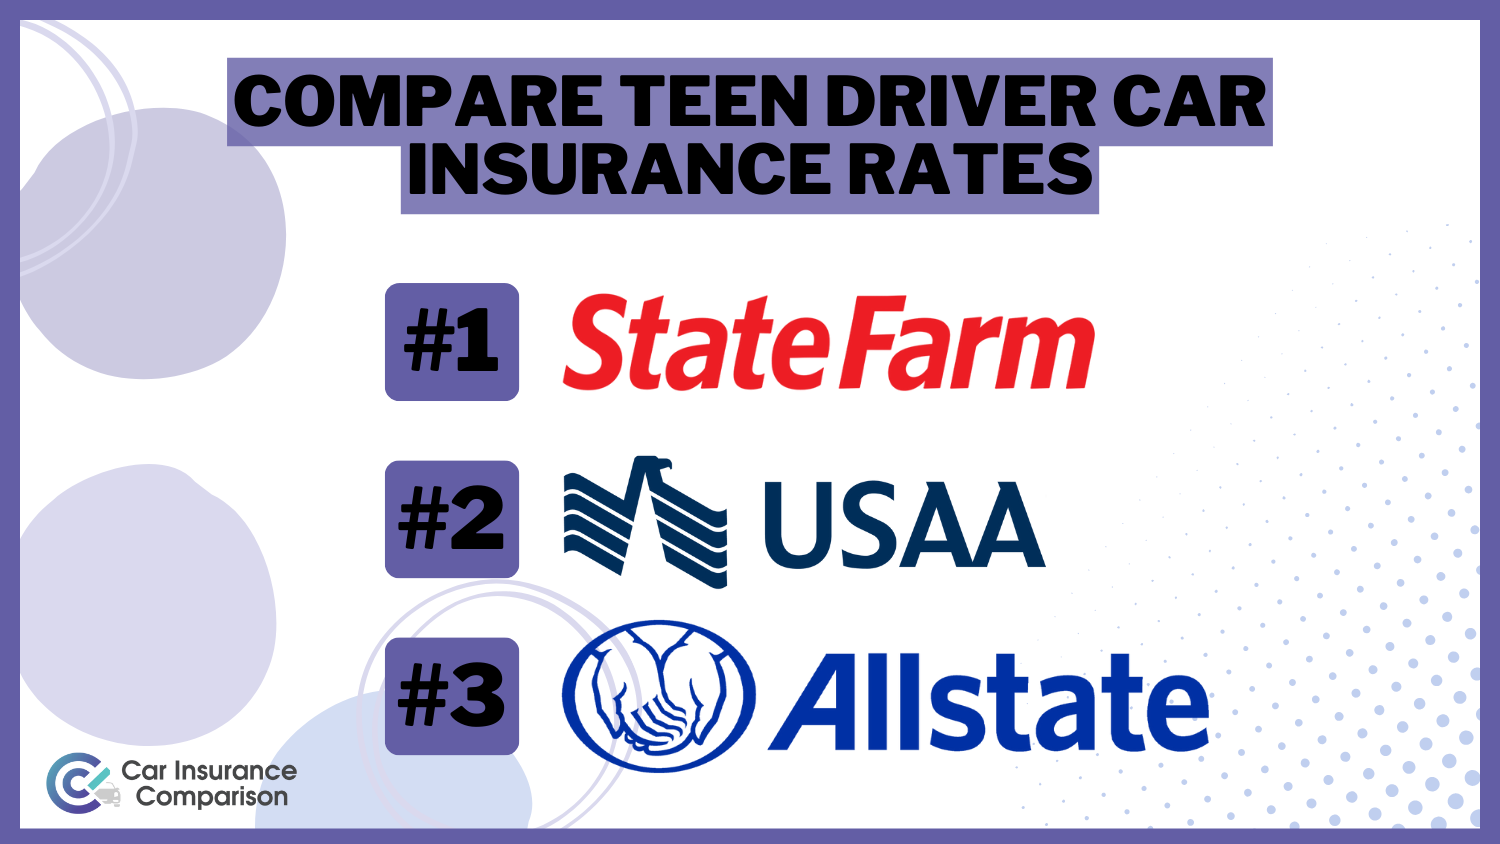 Compare Teen Driver Car Insurance Rates: State Farm, USAA and Allstate